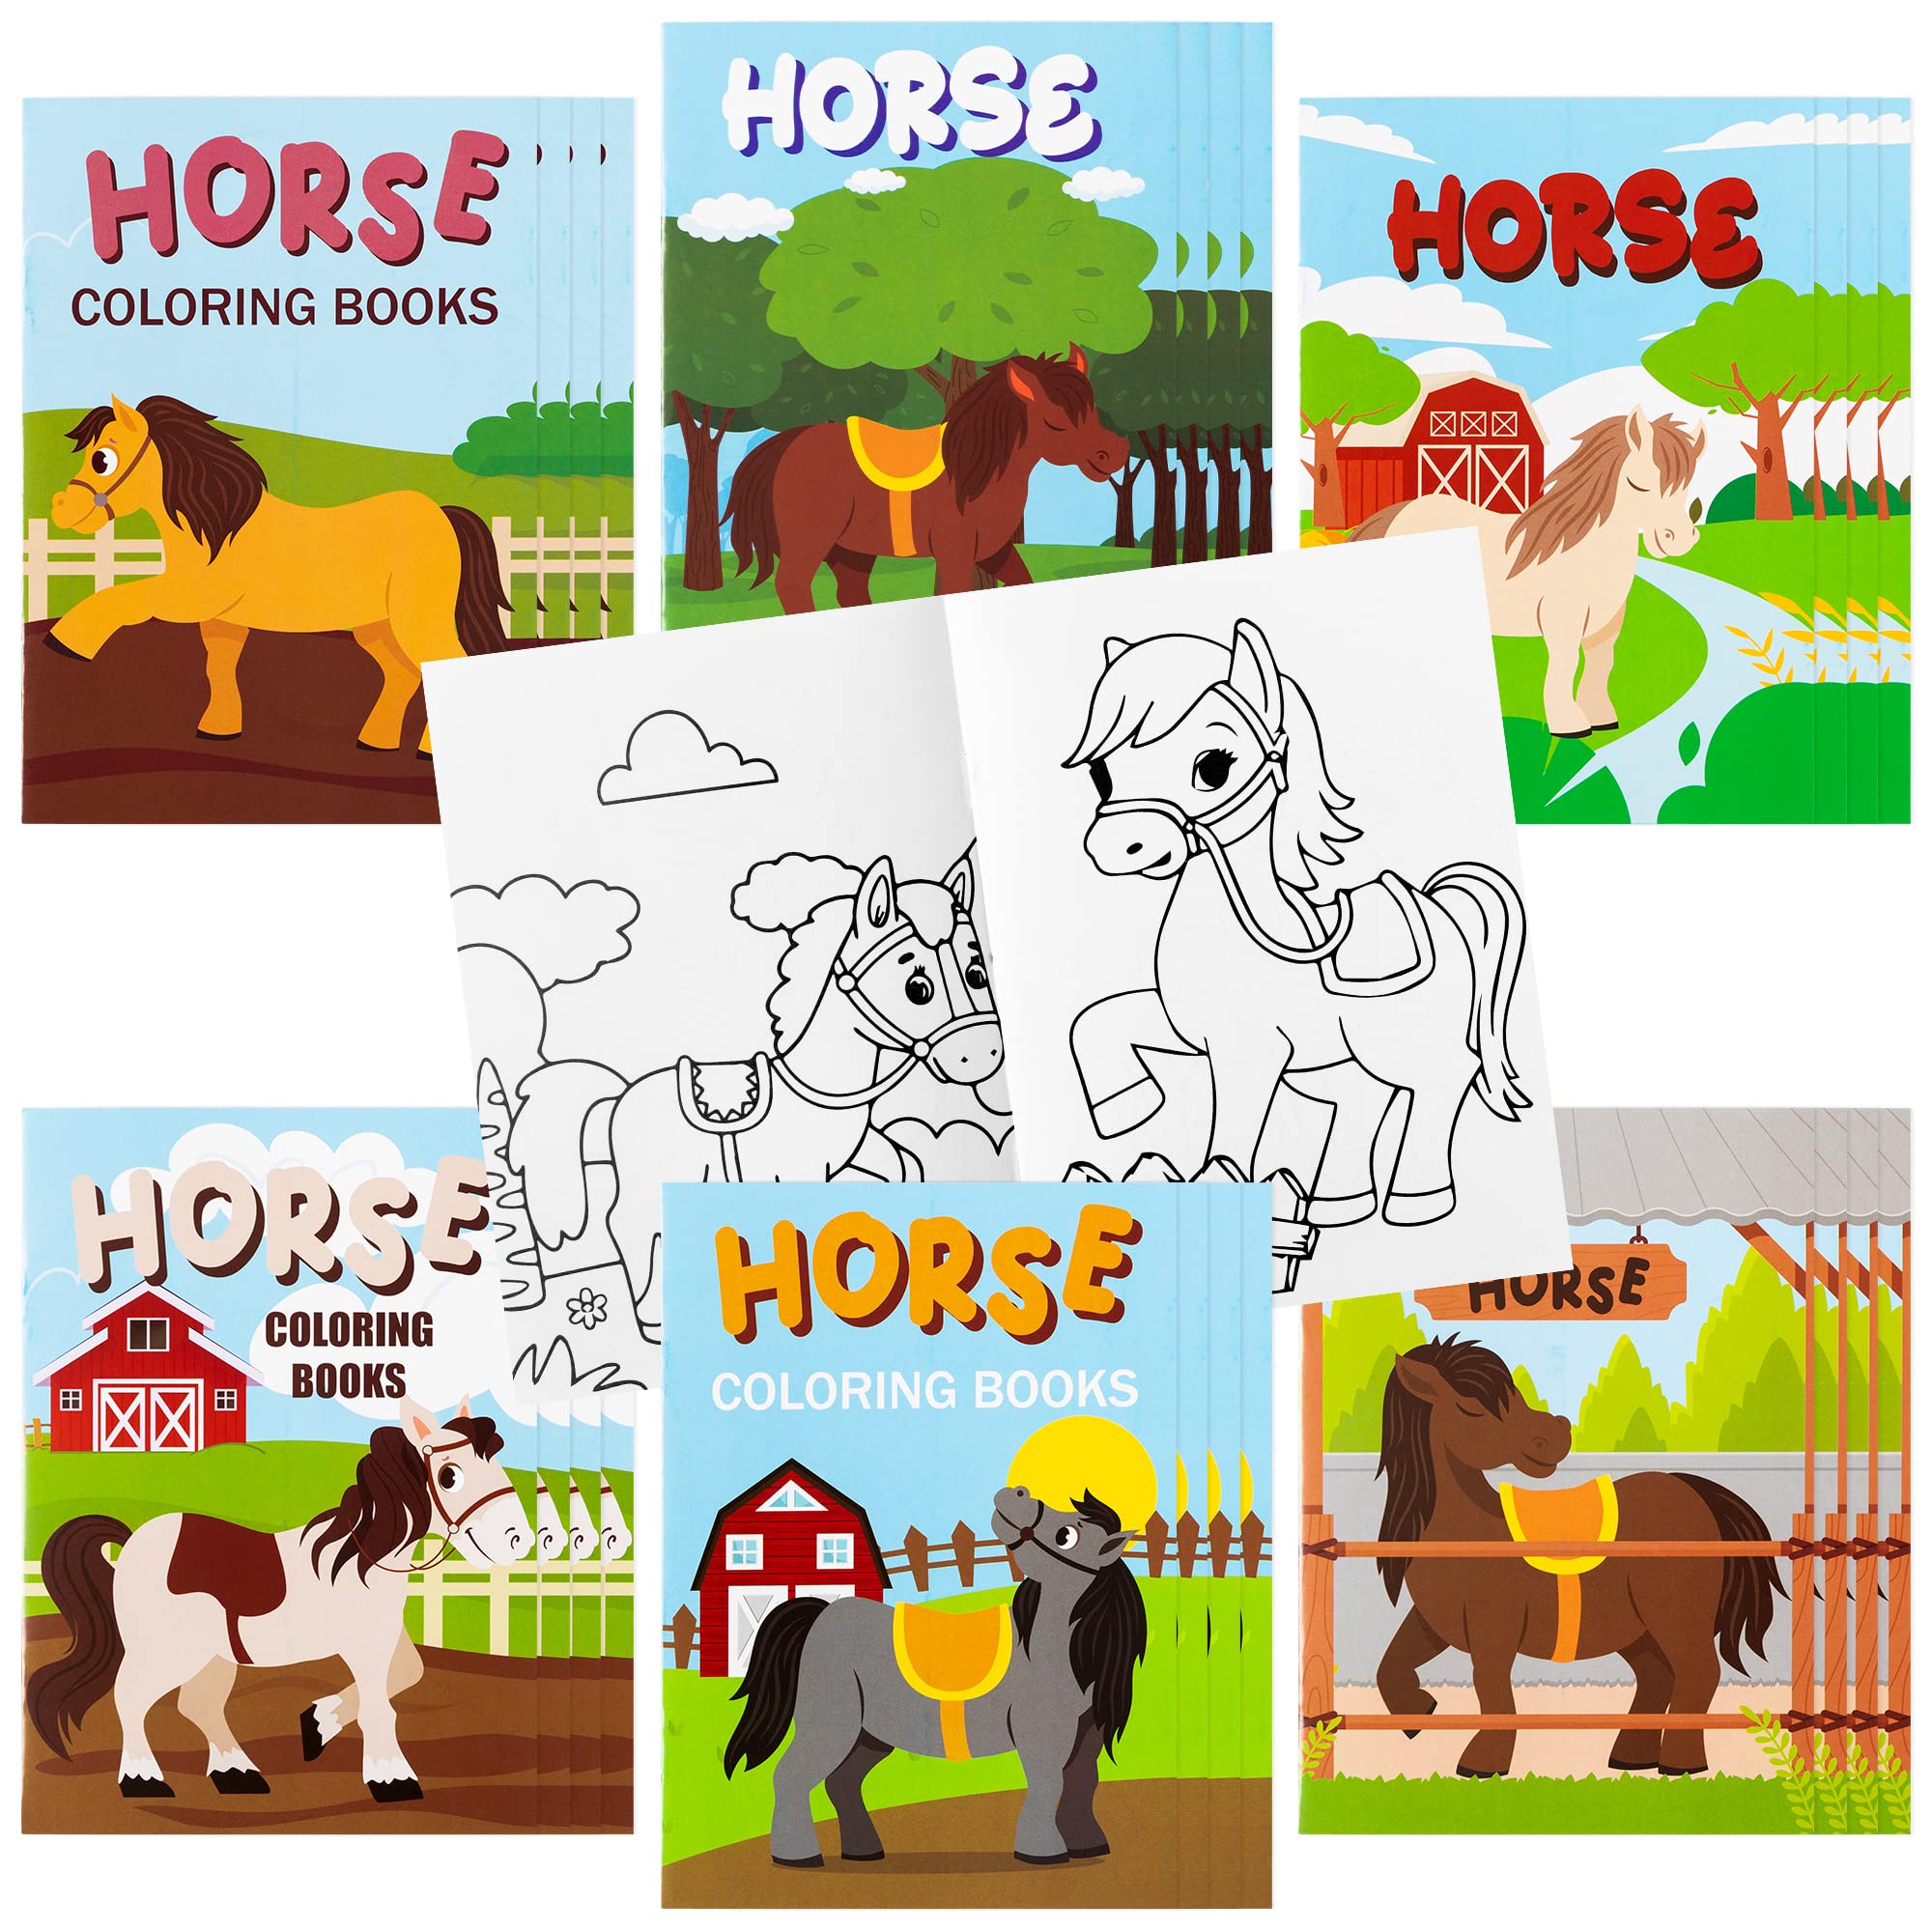 Japbor pcs horse party coloring books for kids farmhouse pony color pages drawing booklet bulk cartoon western horses diy art painting craft games party favors carnival goodie bags fillers toys